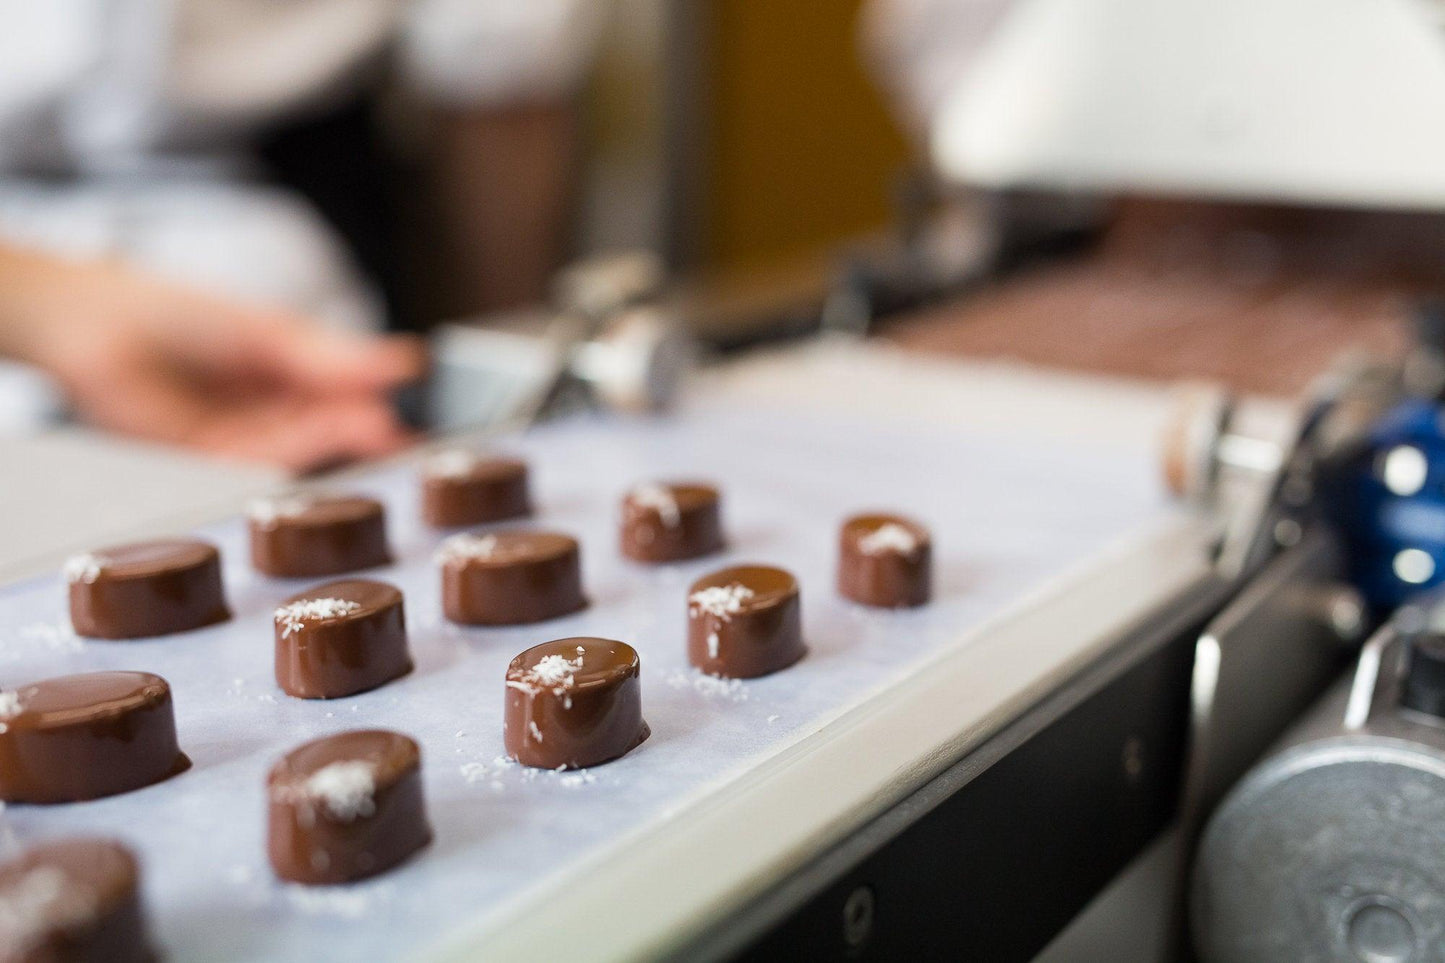 Chocolate making course